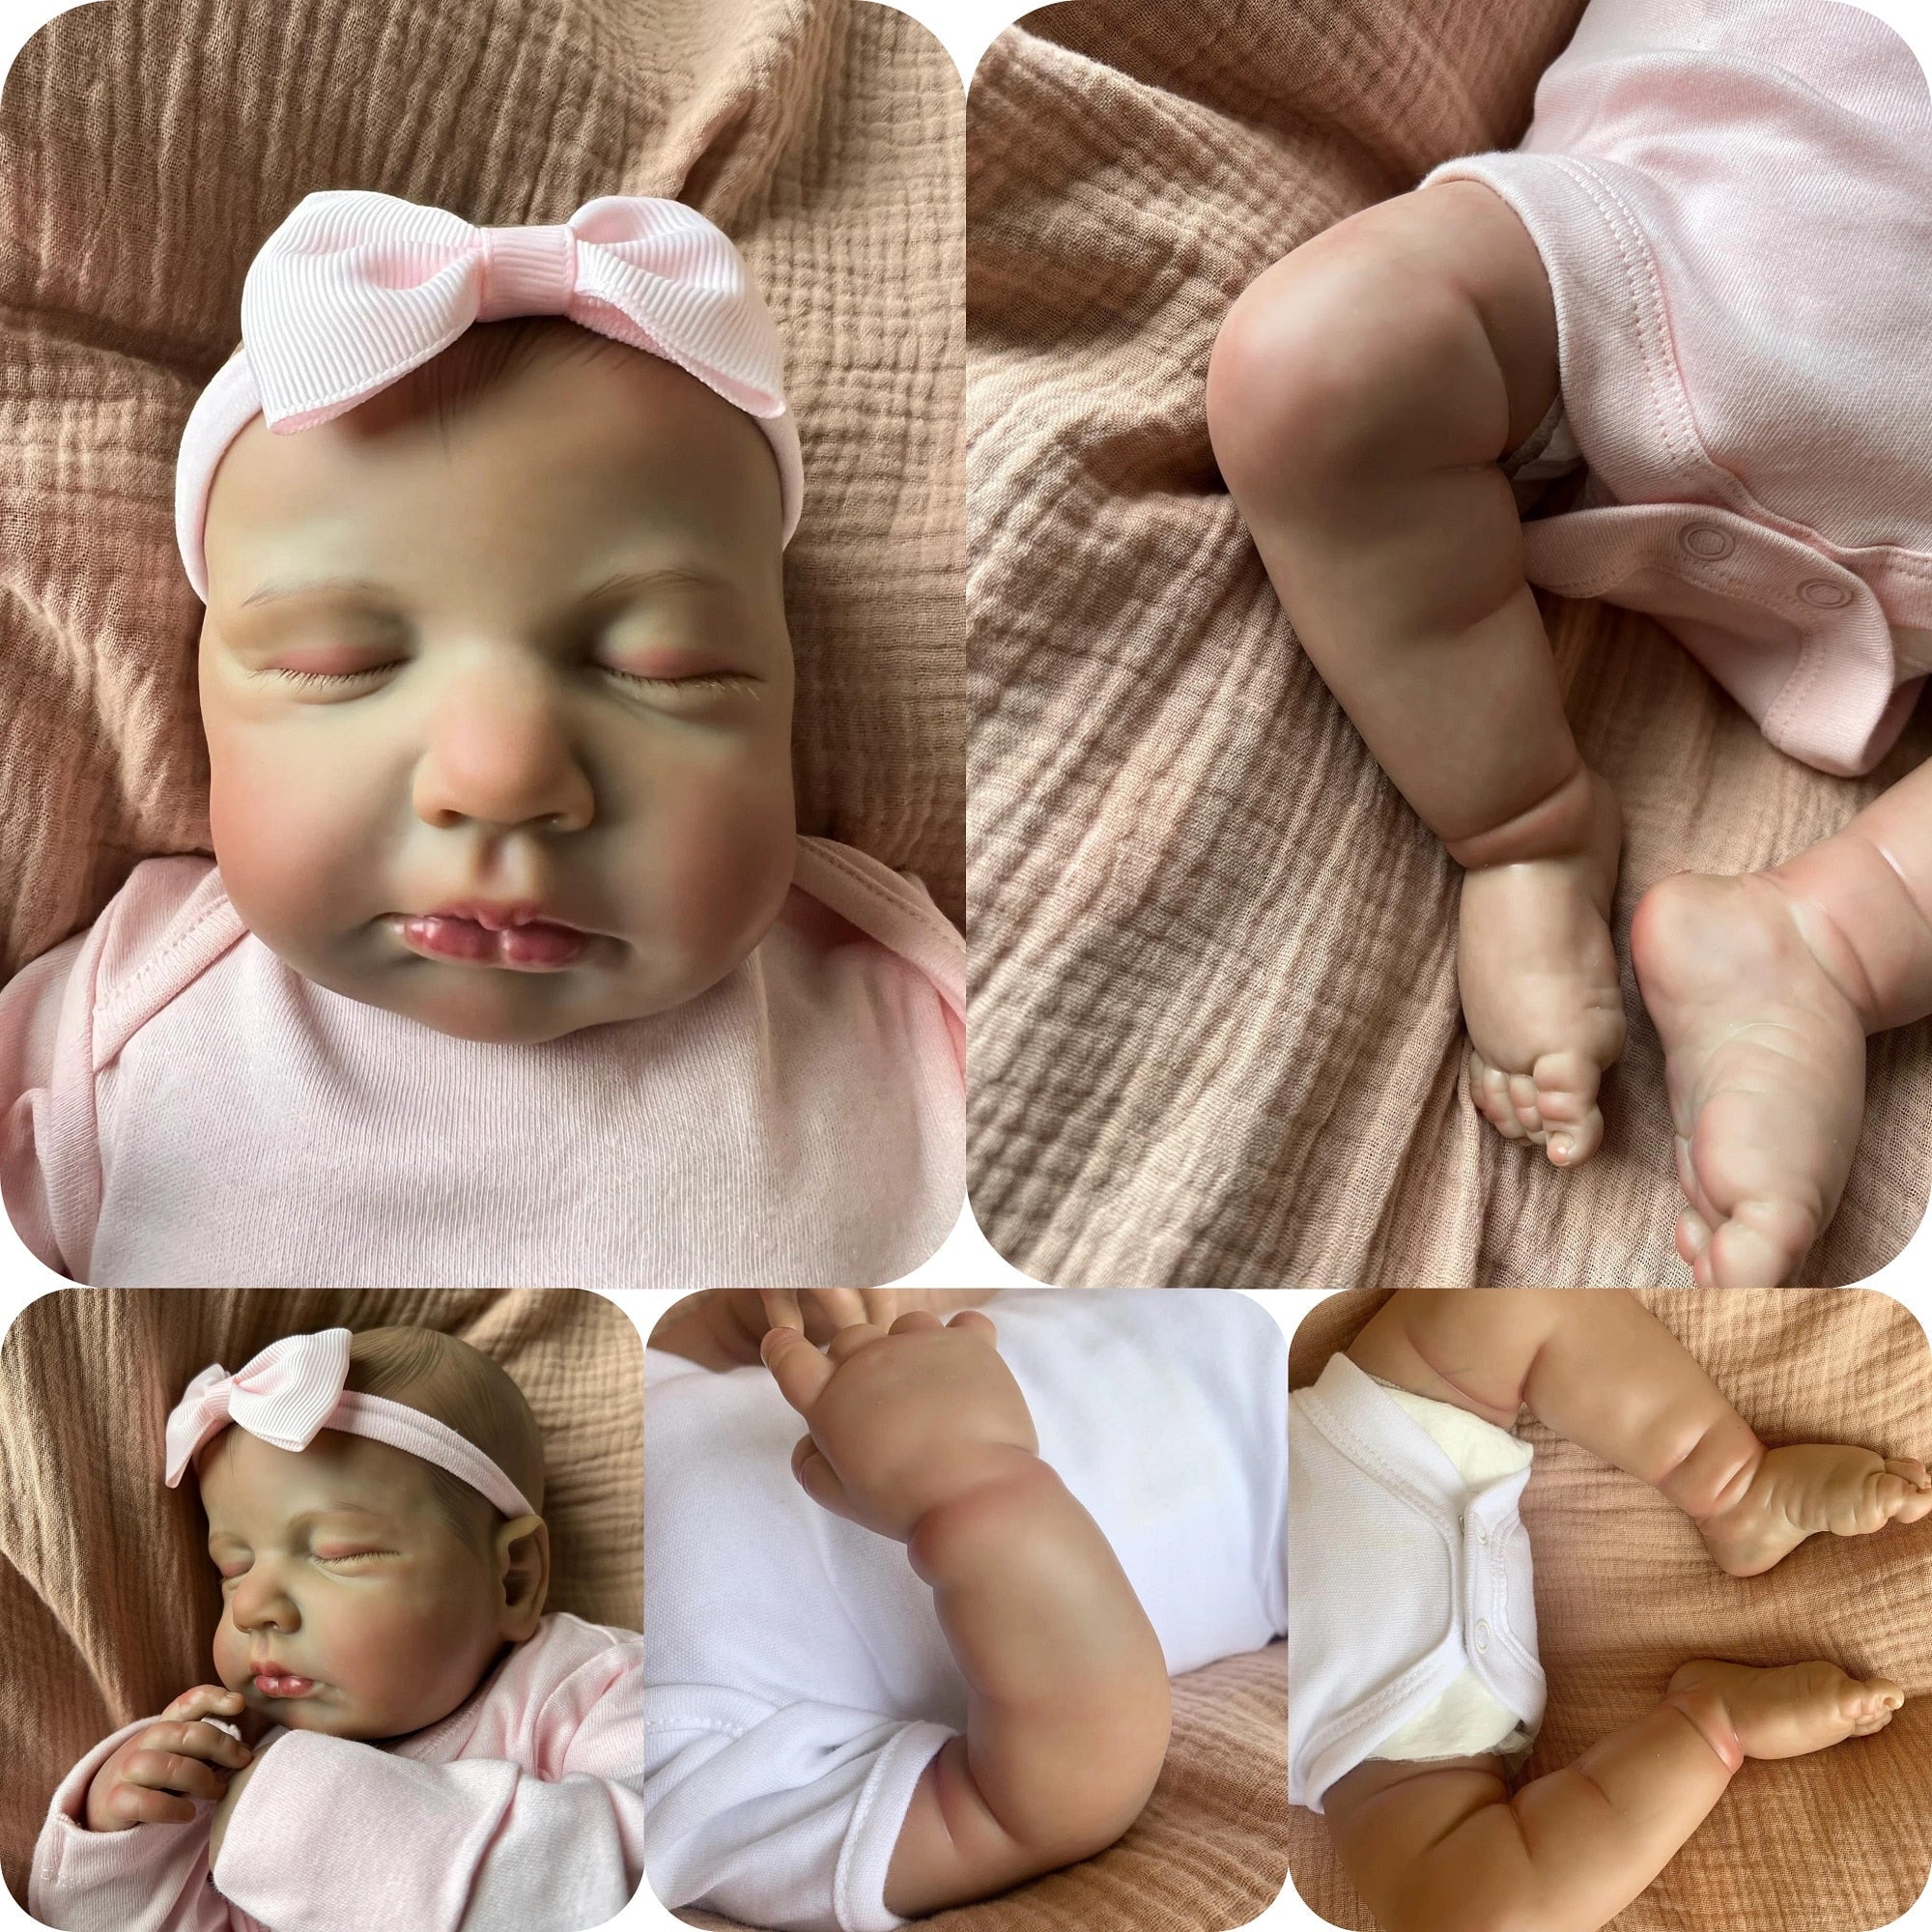 17inches/22inches “Lillte April” Unpainted Sleeping, 51% OFF